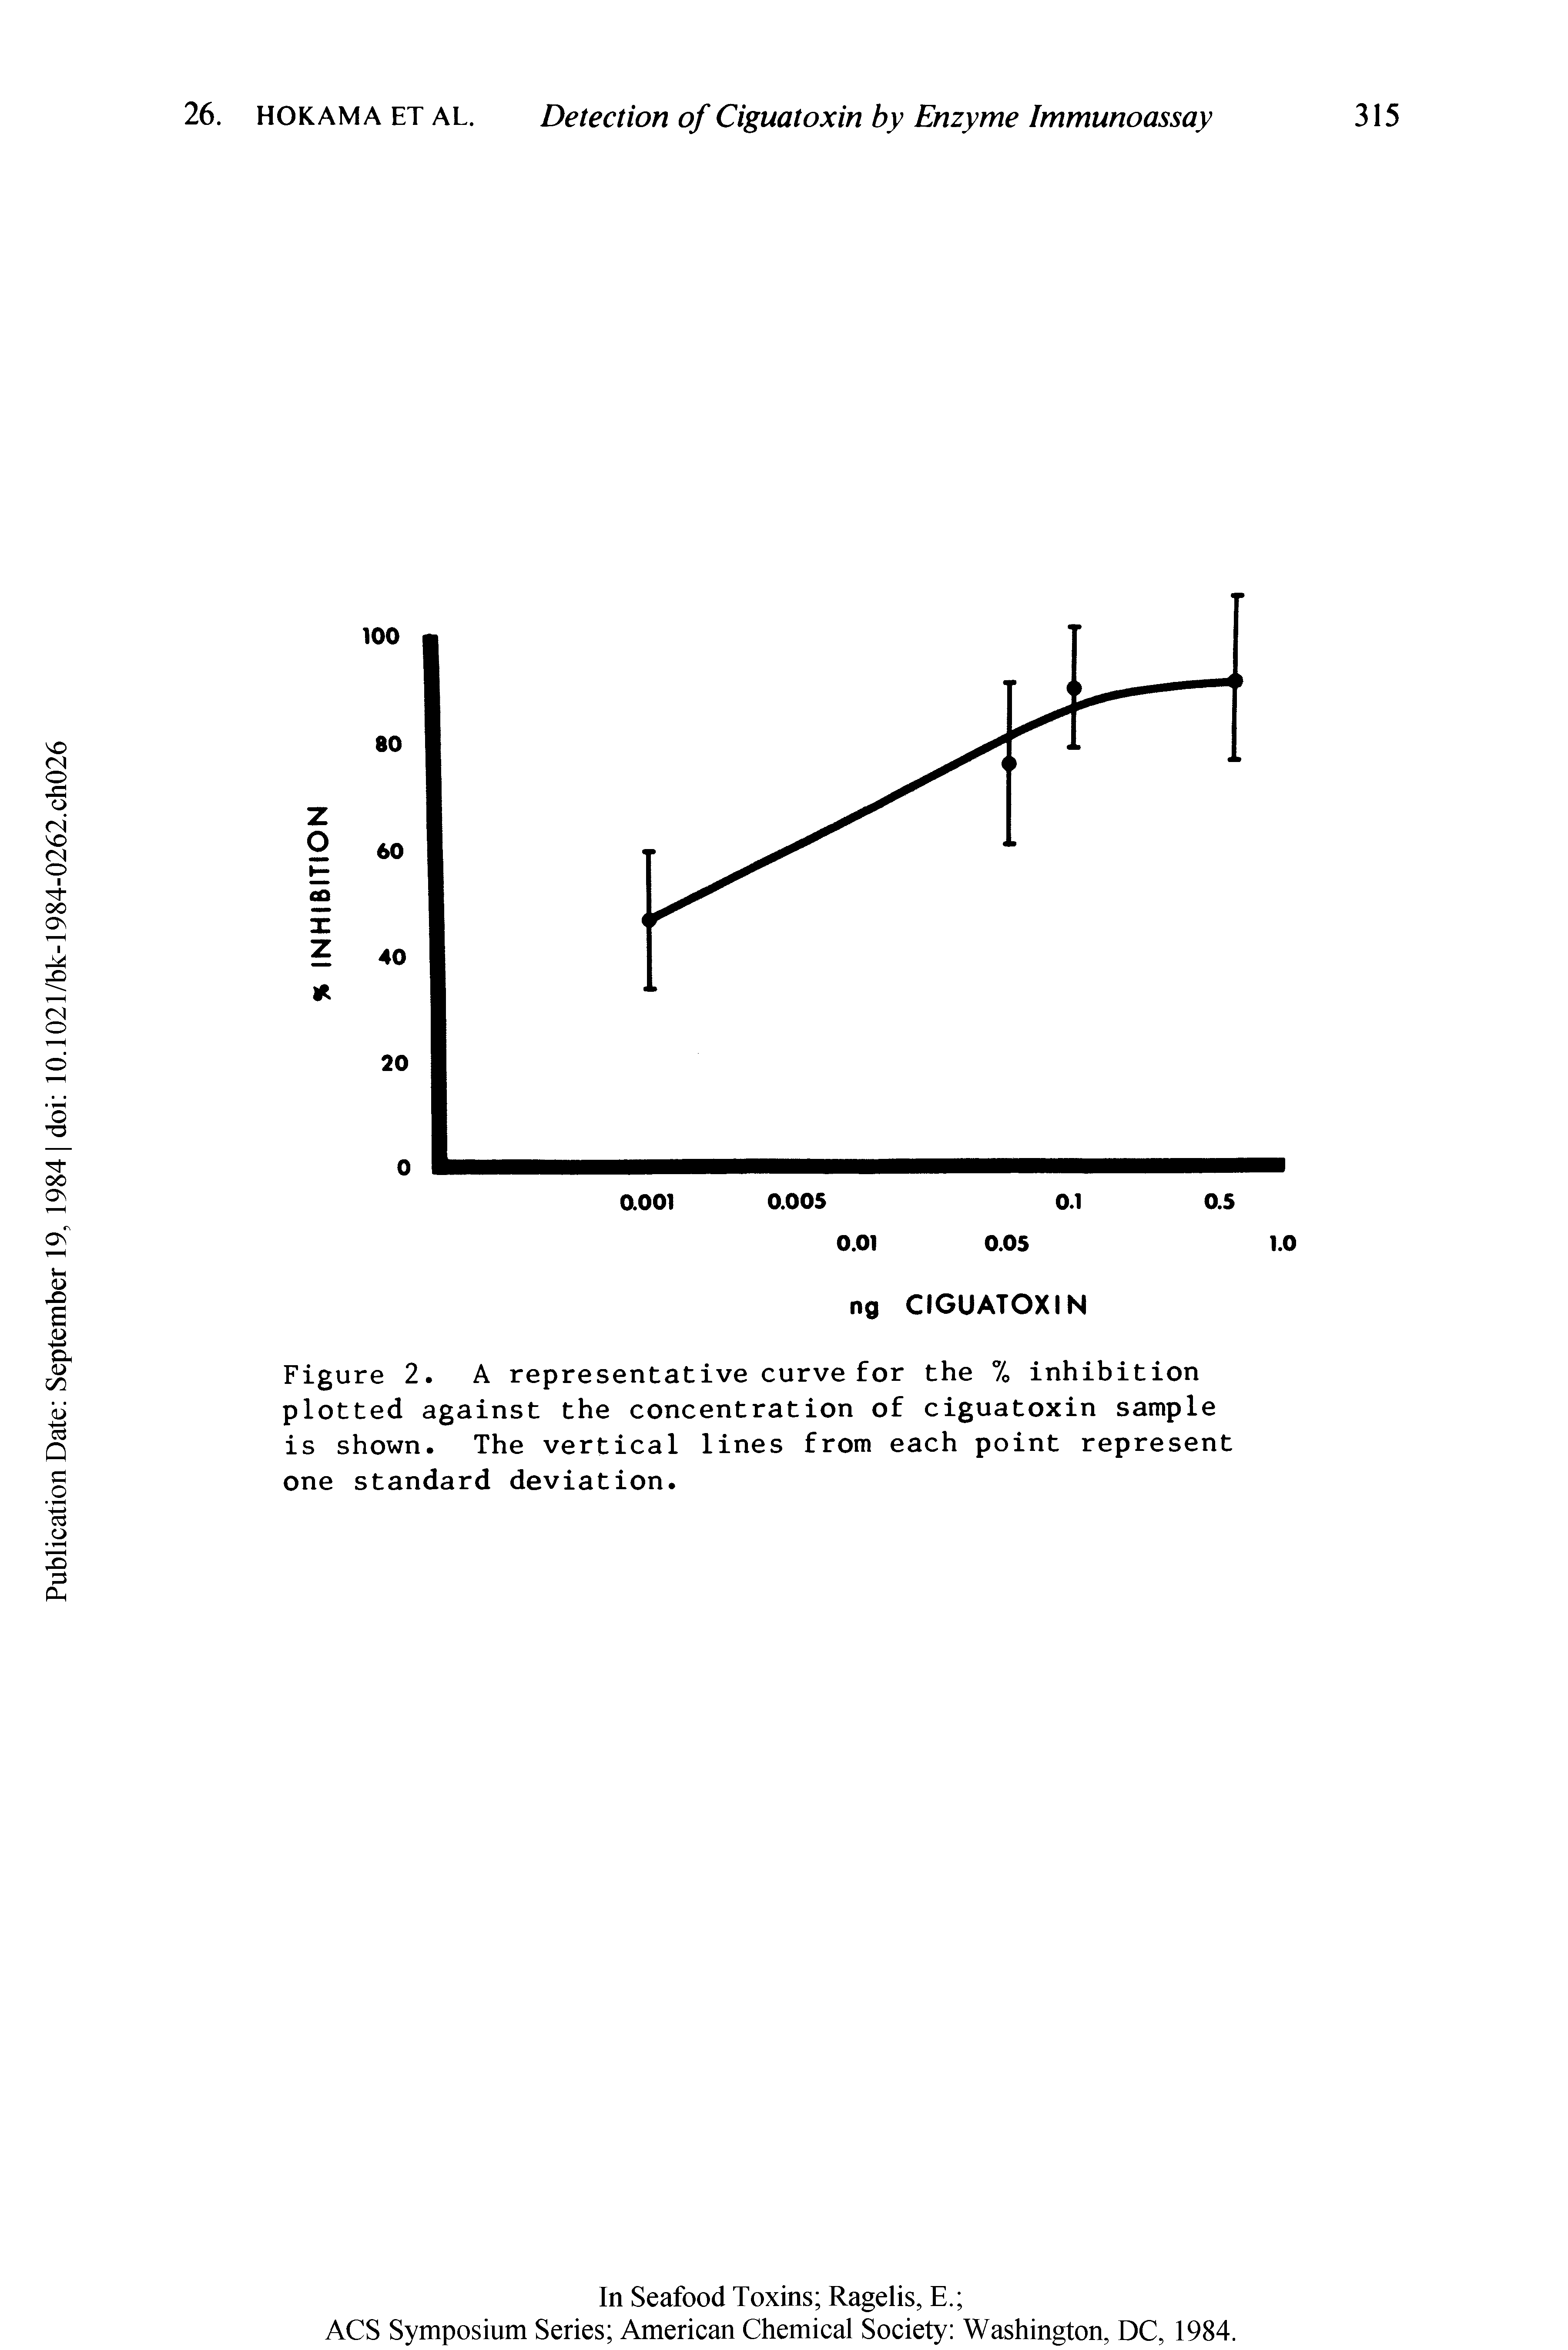 Figure 2. A representative curve for the 7o inhibition plotted against the concentration of ciguatoxin sample is shown. The vertical lines from each point represent one standard deviation.